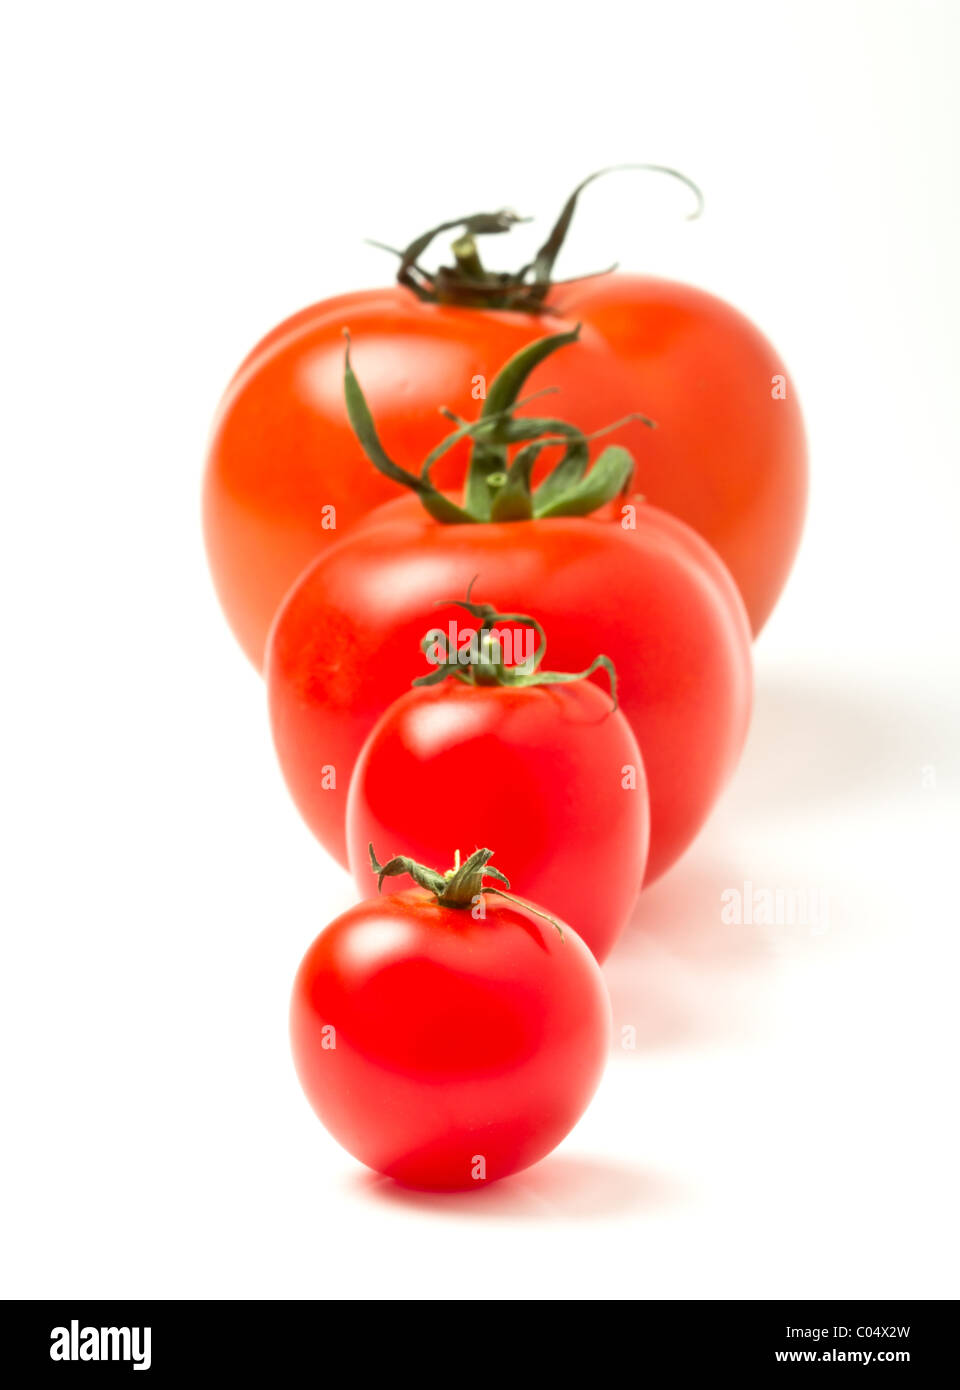 Tomato line up of four different varieties isolated on white. Stock Photo